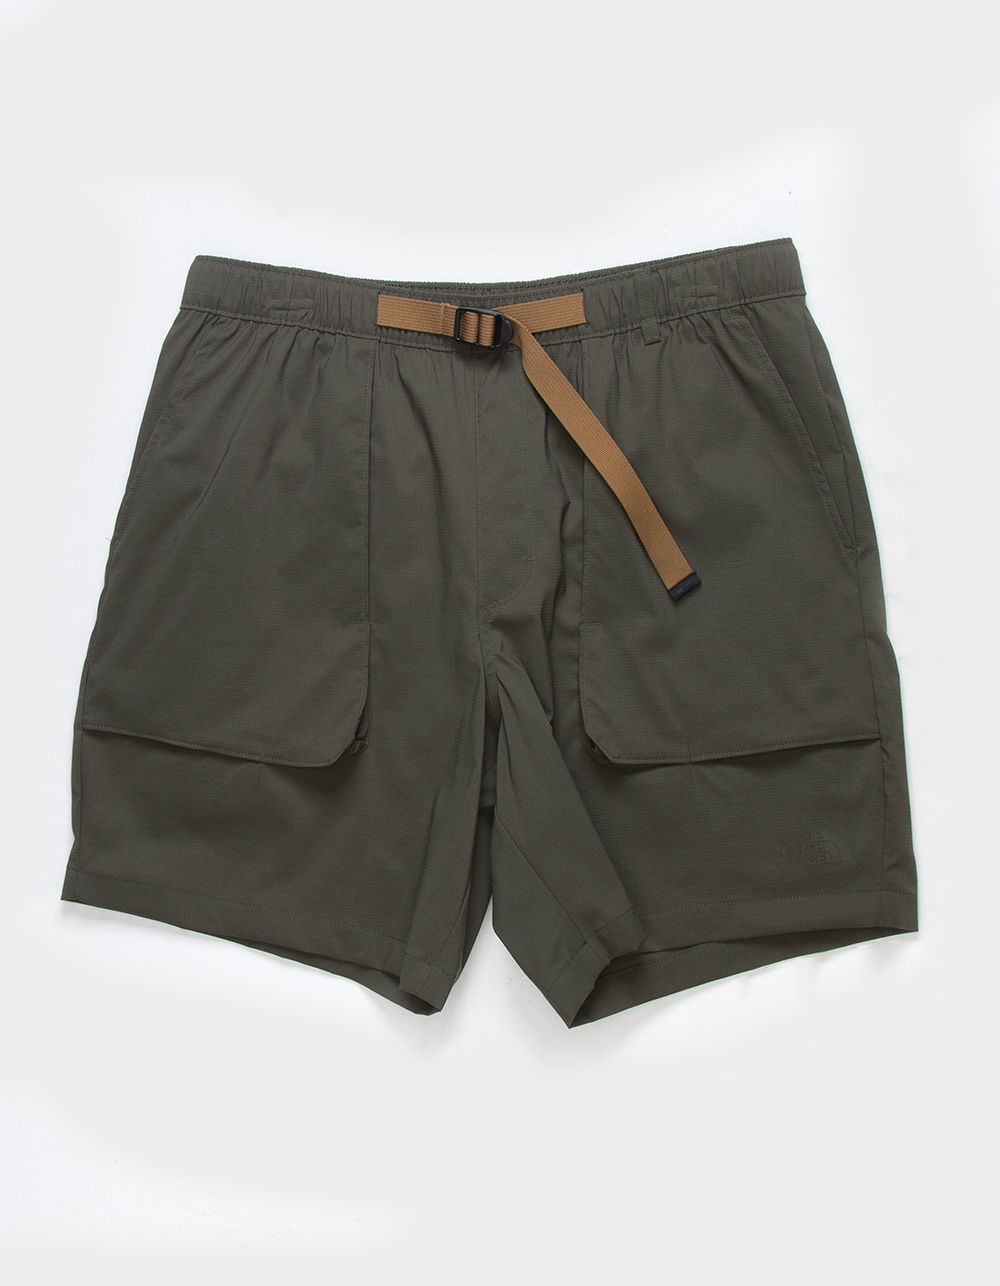 THE NORTH FACE Classic V Ripstop Mens Shorts - MILITARY | Tillys